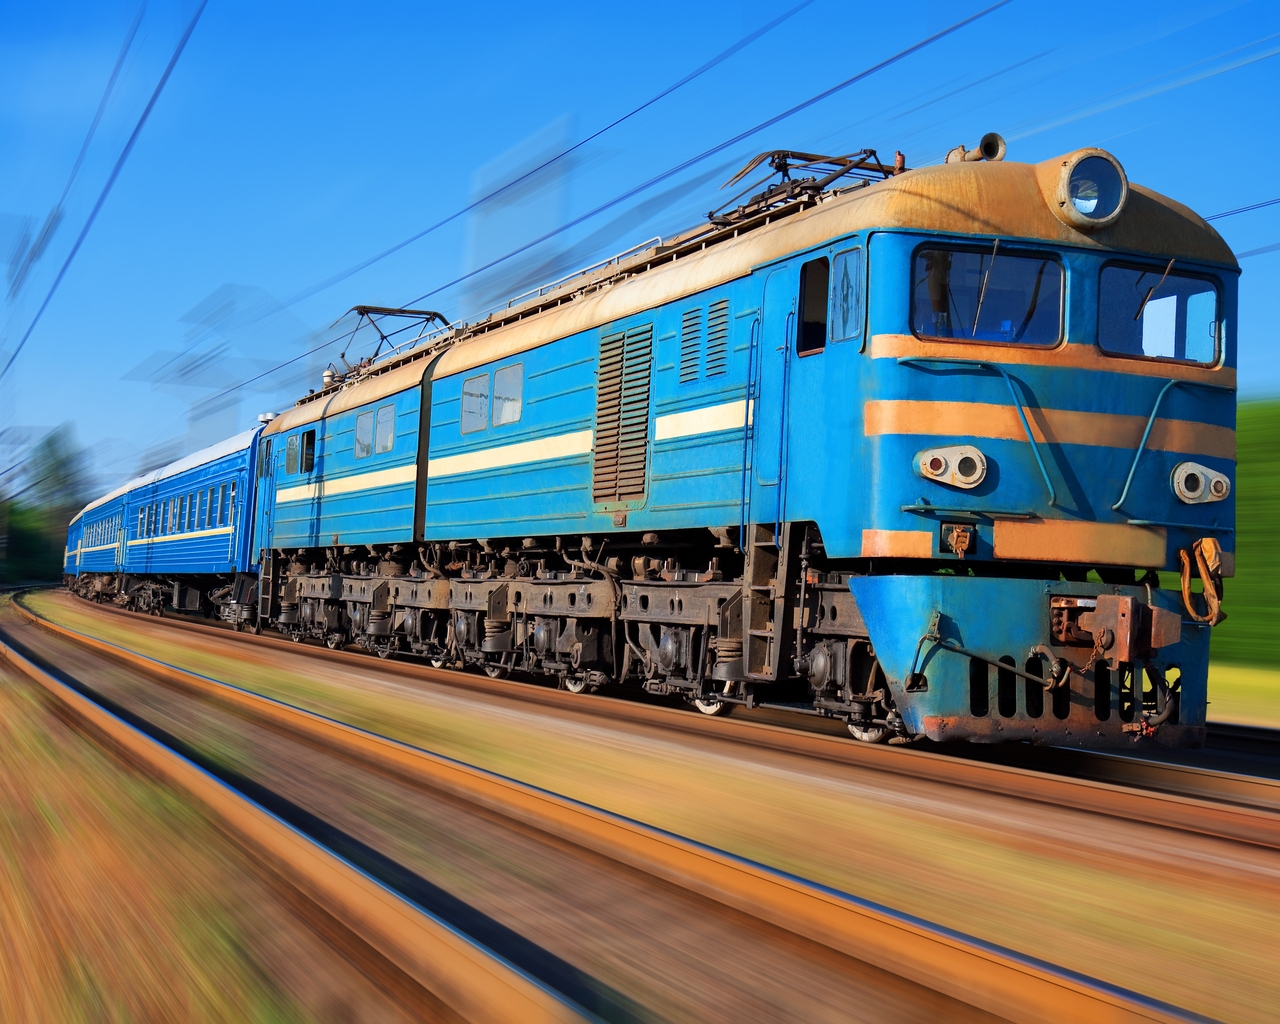 Old Blue Train for 1280 x 1024 resolution